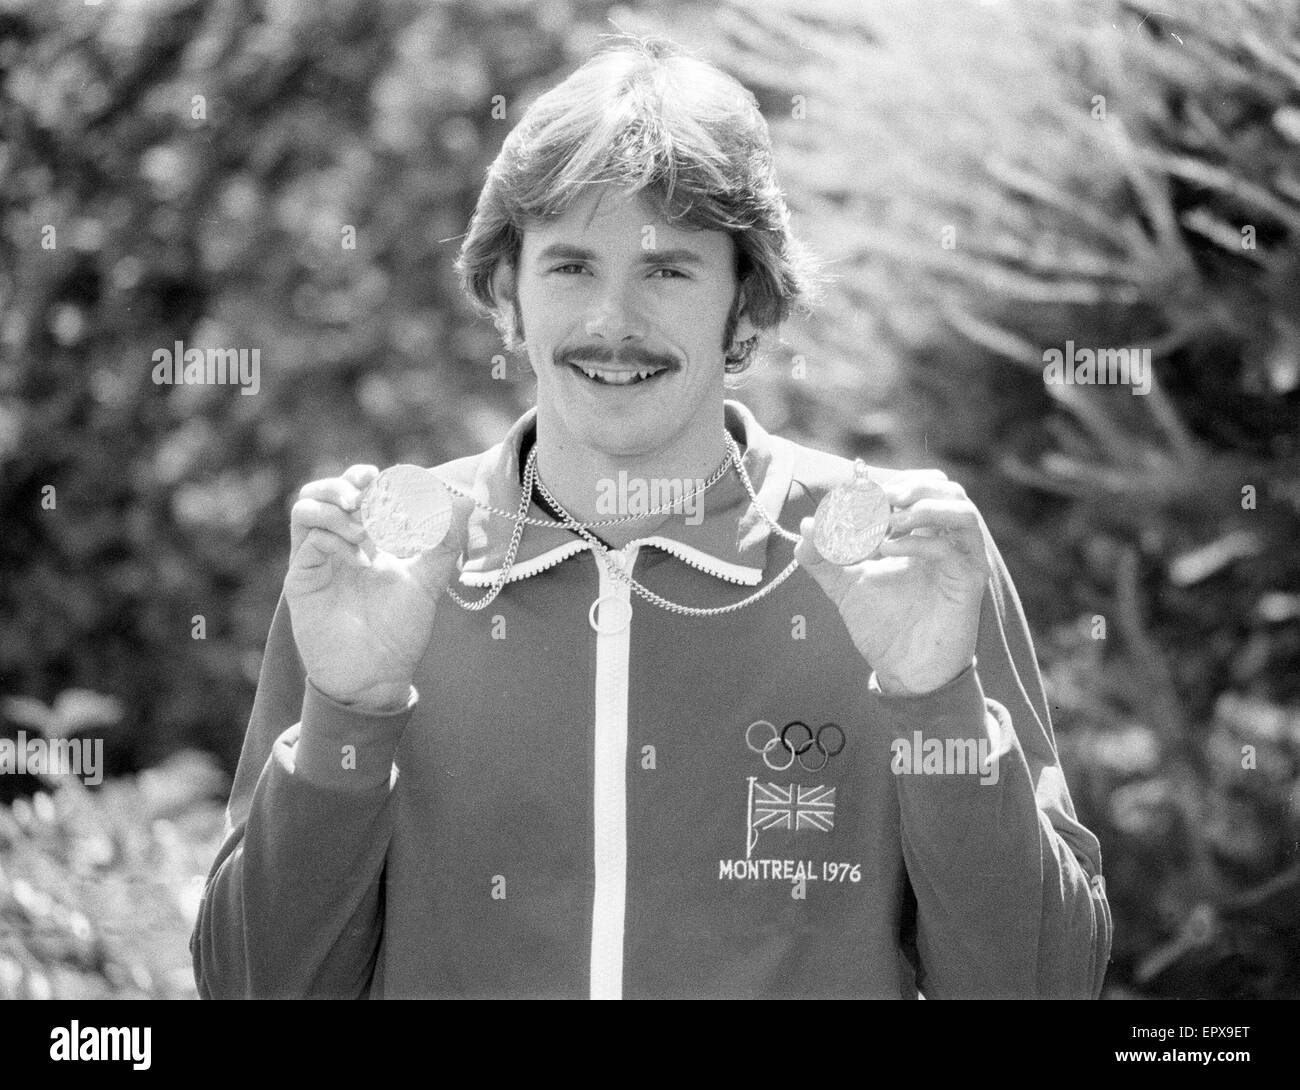 David Wilkie, Olympic Champion, 200 metre breaststroke,  Montreal Olympics, Canada, July 1976. Pictured in Montreal with Gold medal and Silver medal he later won in 100 metre breaststroke. Stock Photo